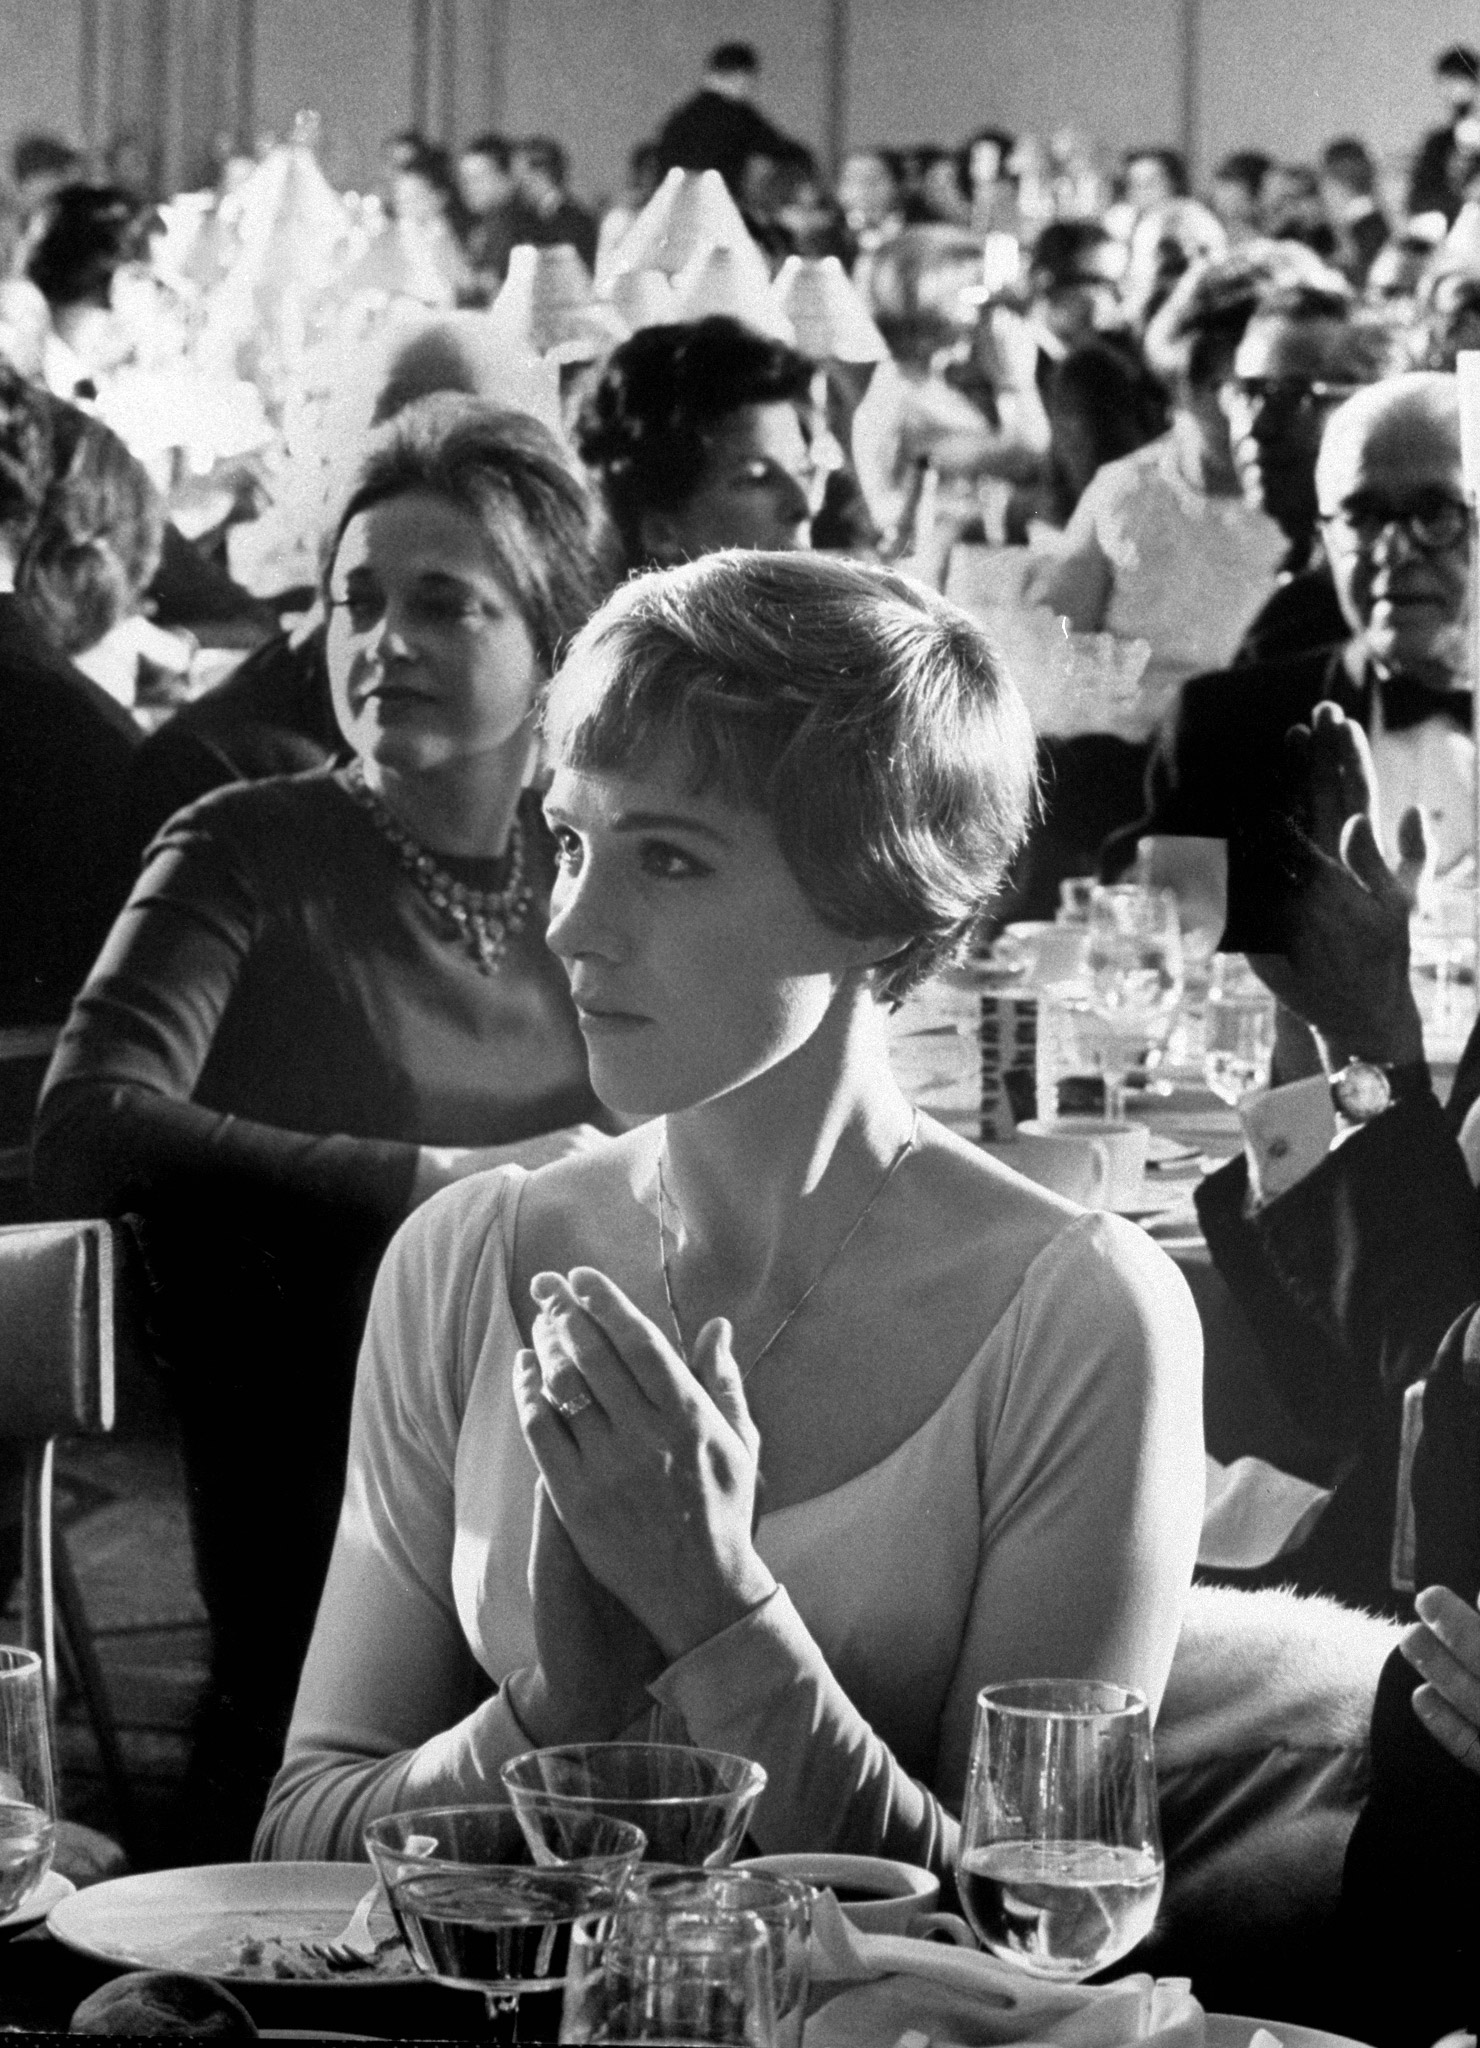 Actress Julie Andrews at premier of film 'Sound of Music'.